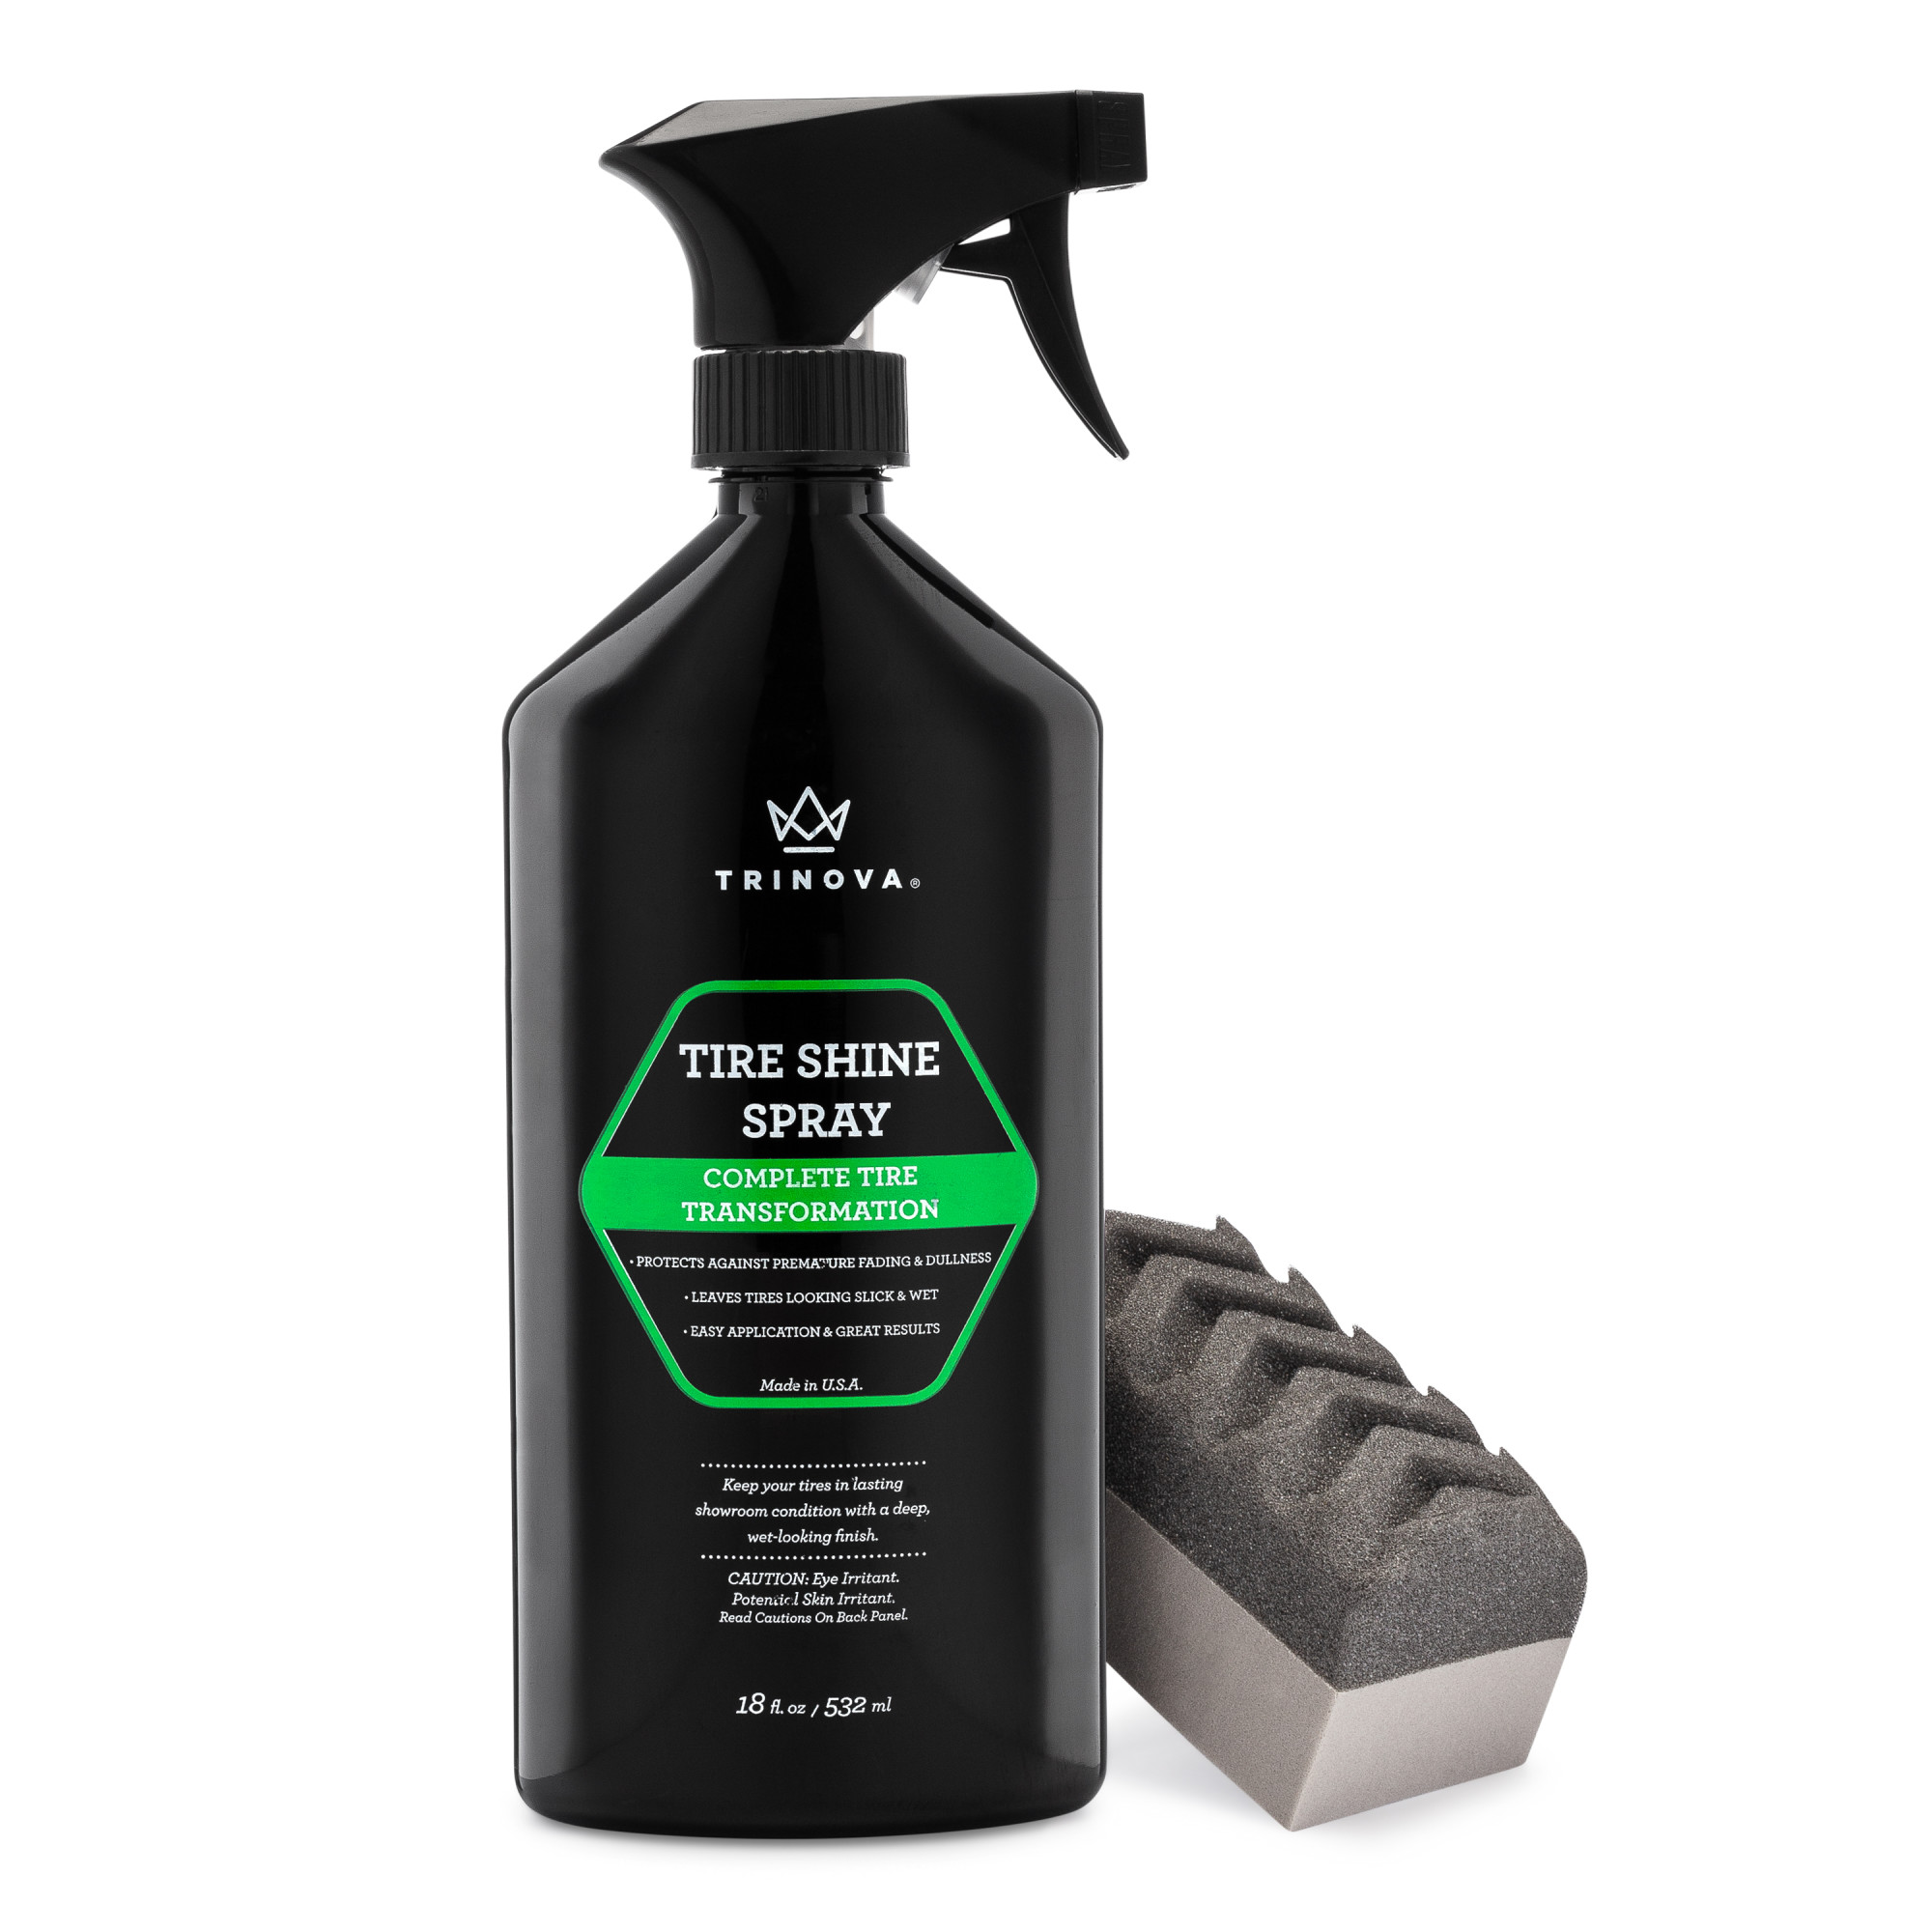 TriNova Tire Shine Spray No Wipe - Automotive Clear Coat Dressing for Wet & Slick Finish - Keeps Tires Black - with Rubber Protector - Prevents Fading & Yellowing - 18 OZ - image 1 of 11